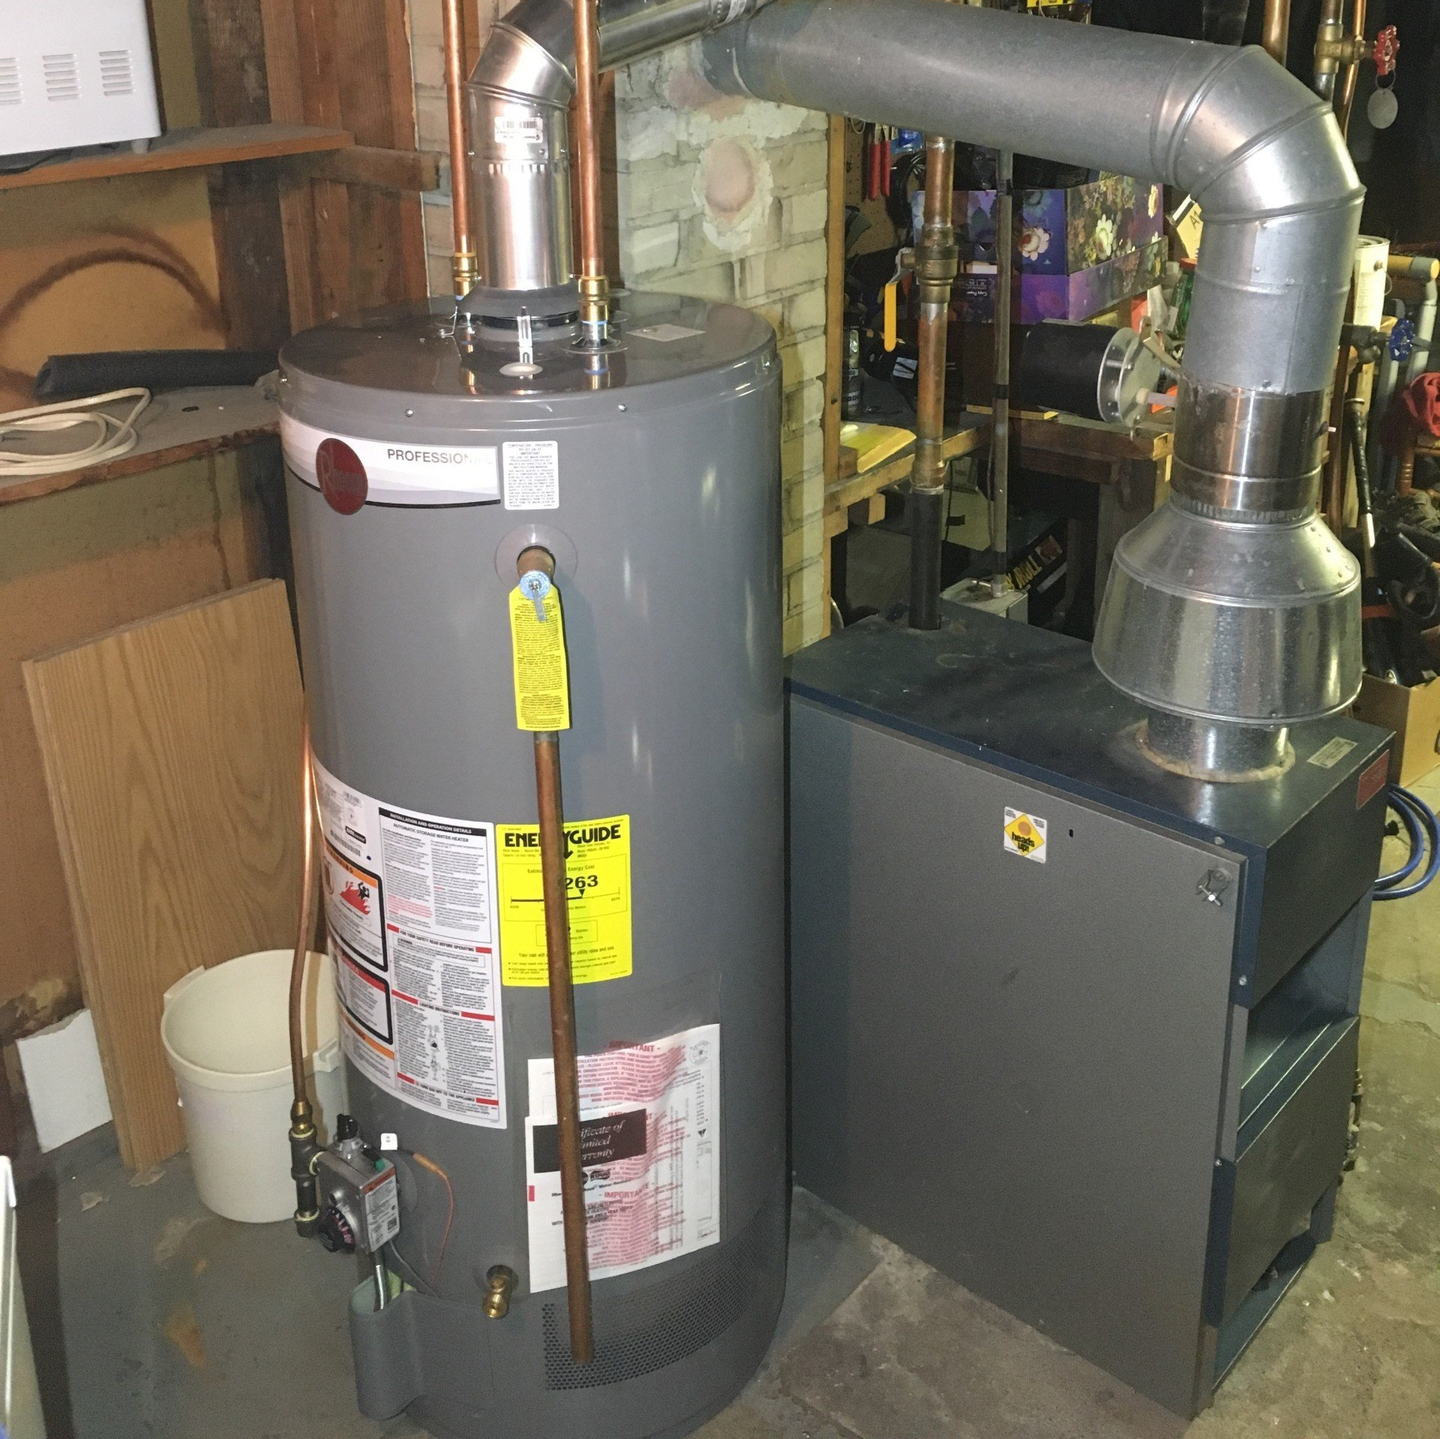 When Should You Replace Your Hot Water Heater?